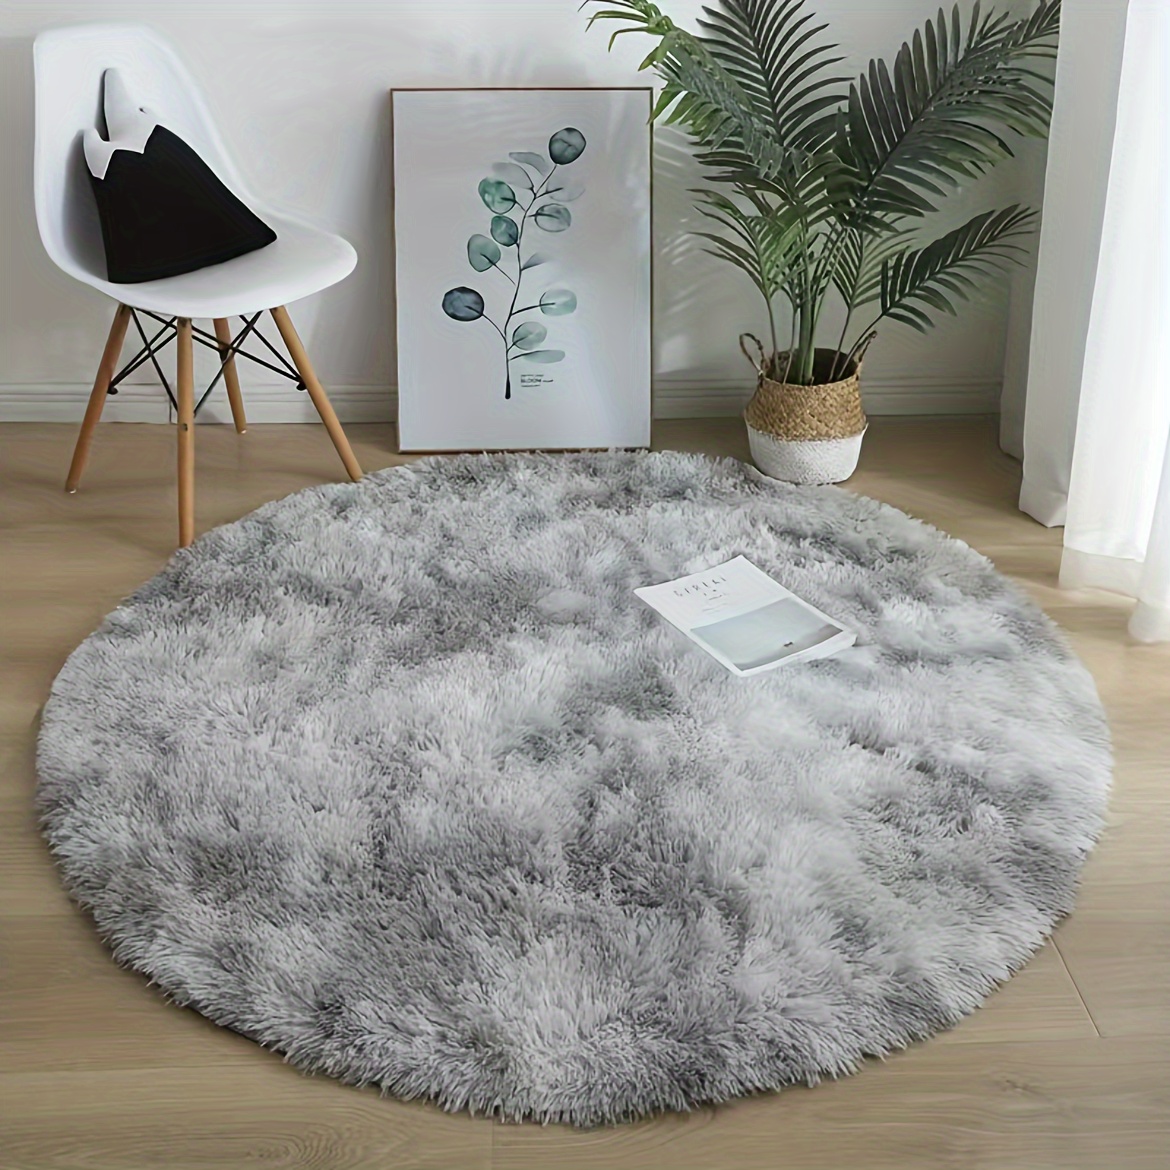 Fluffy Round Rug for Bedroom, Soft Circle Area Rug for Kids Room, Shag  Plush Circular Rugs for Dorm Home Decor, Gray